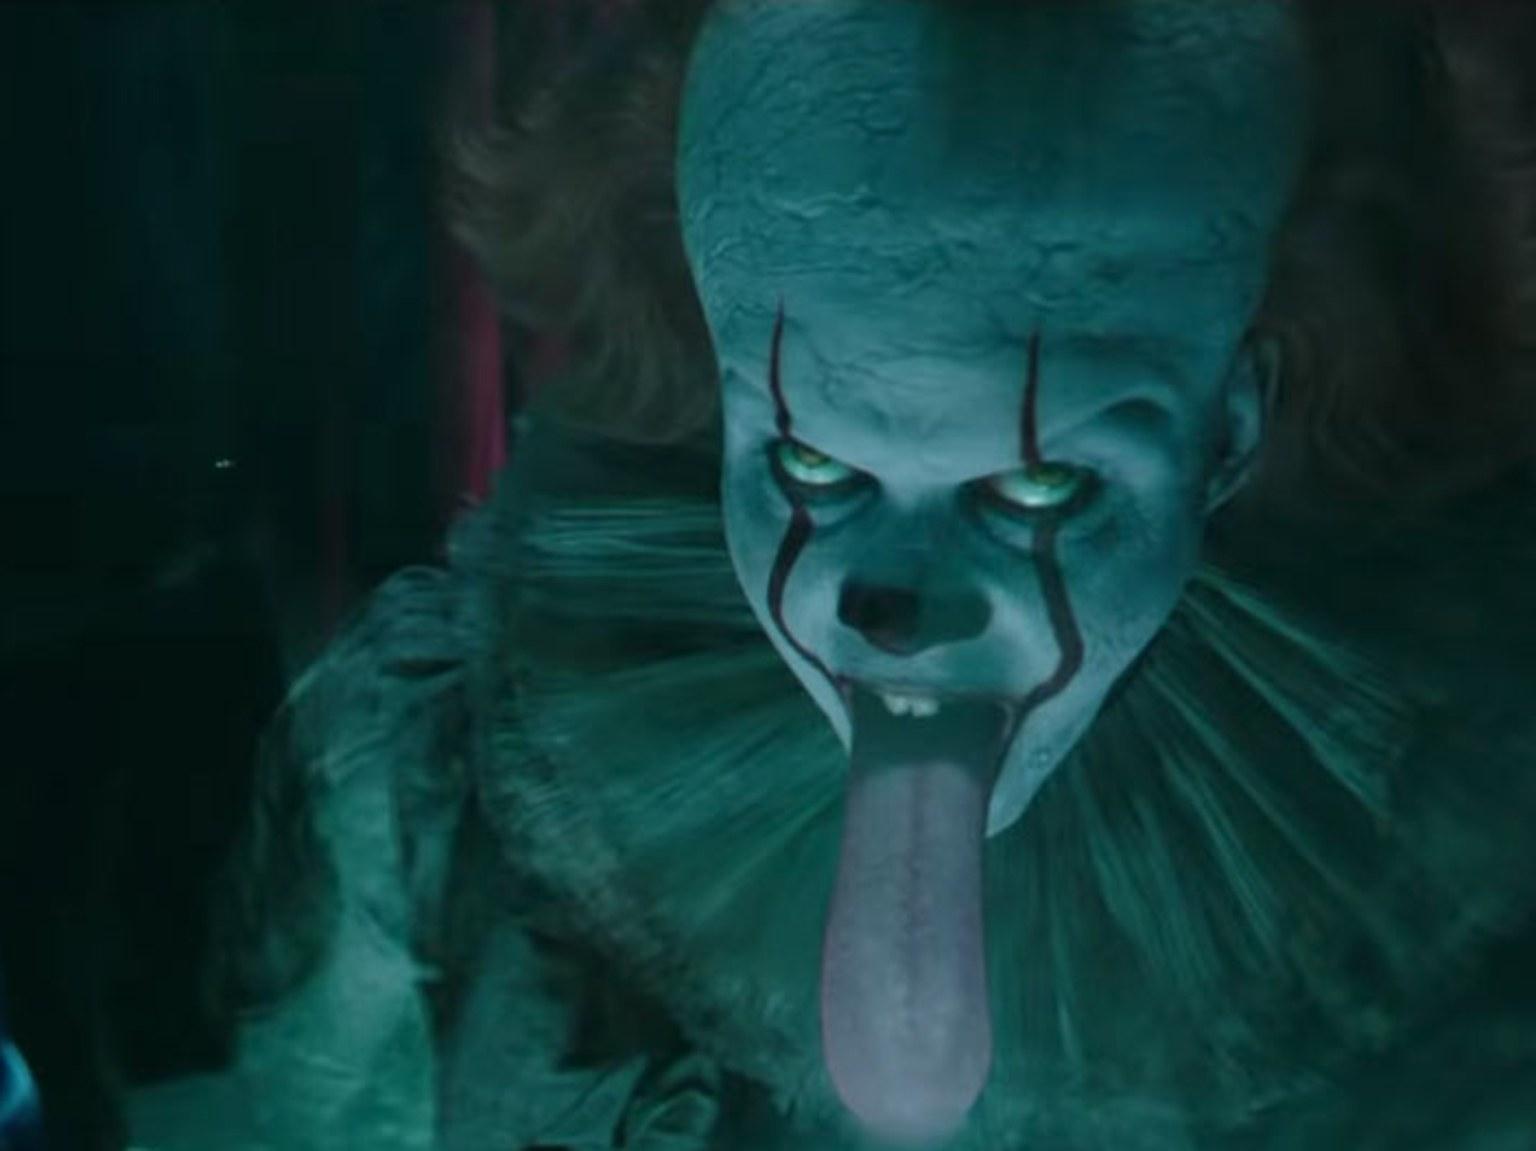 It Chapter 2 Stars Jessica Chastain and Pennywise's Tongue